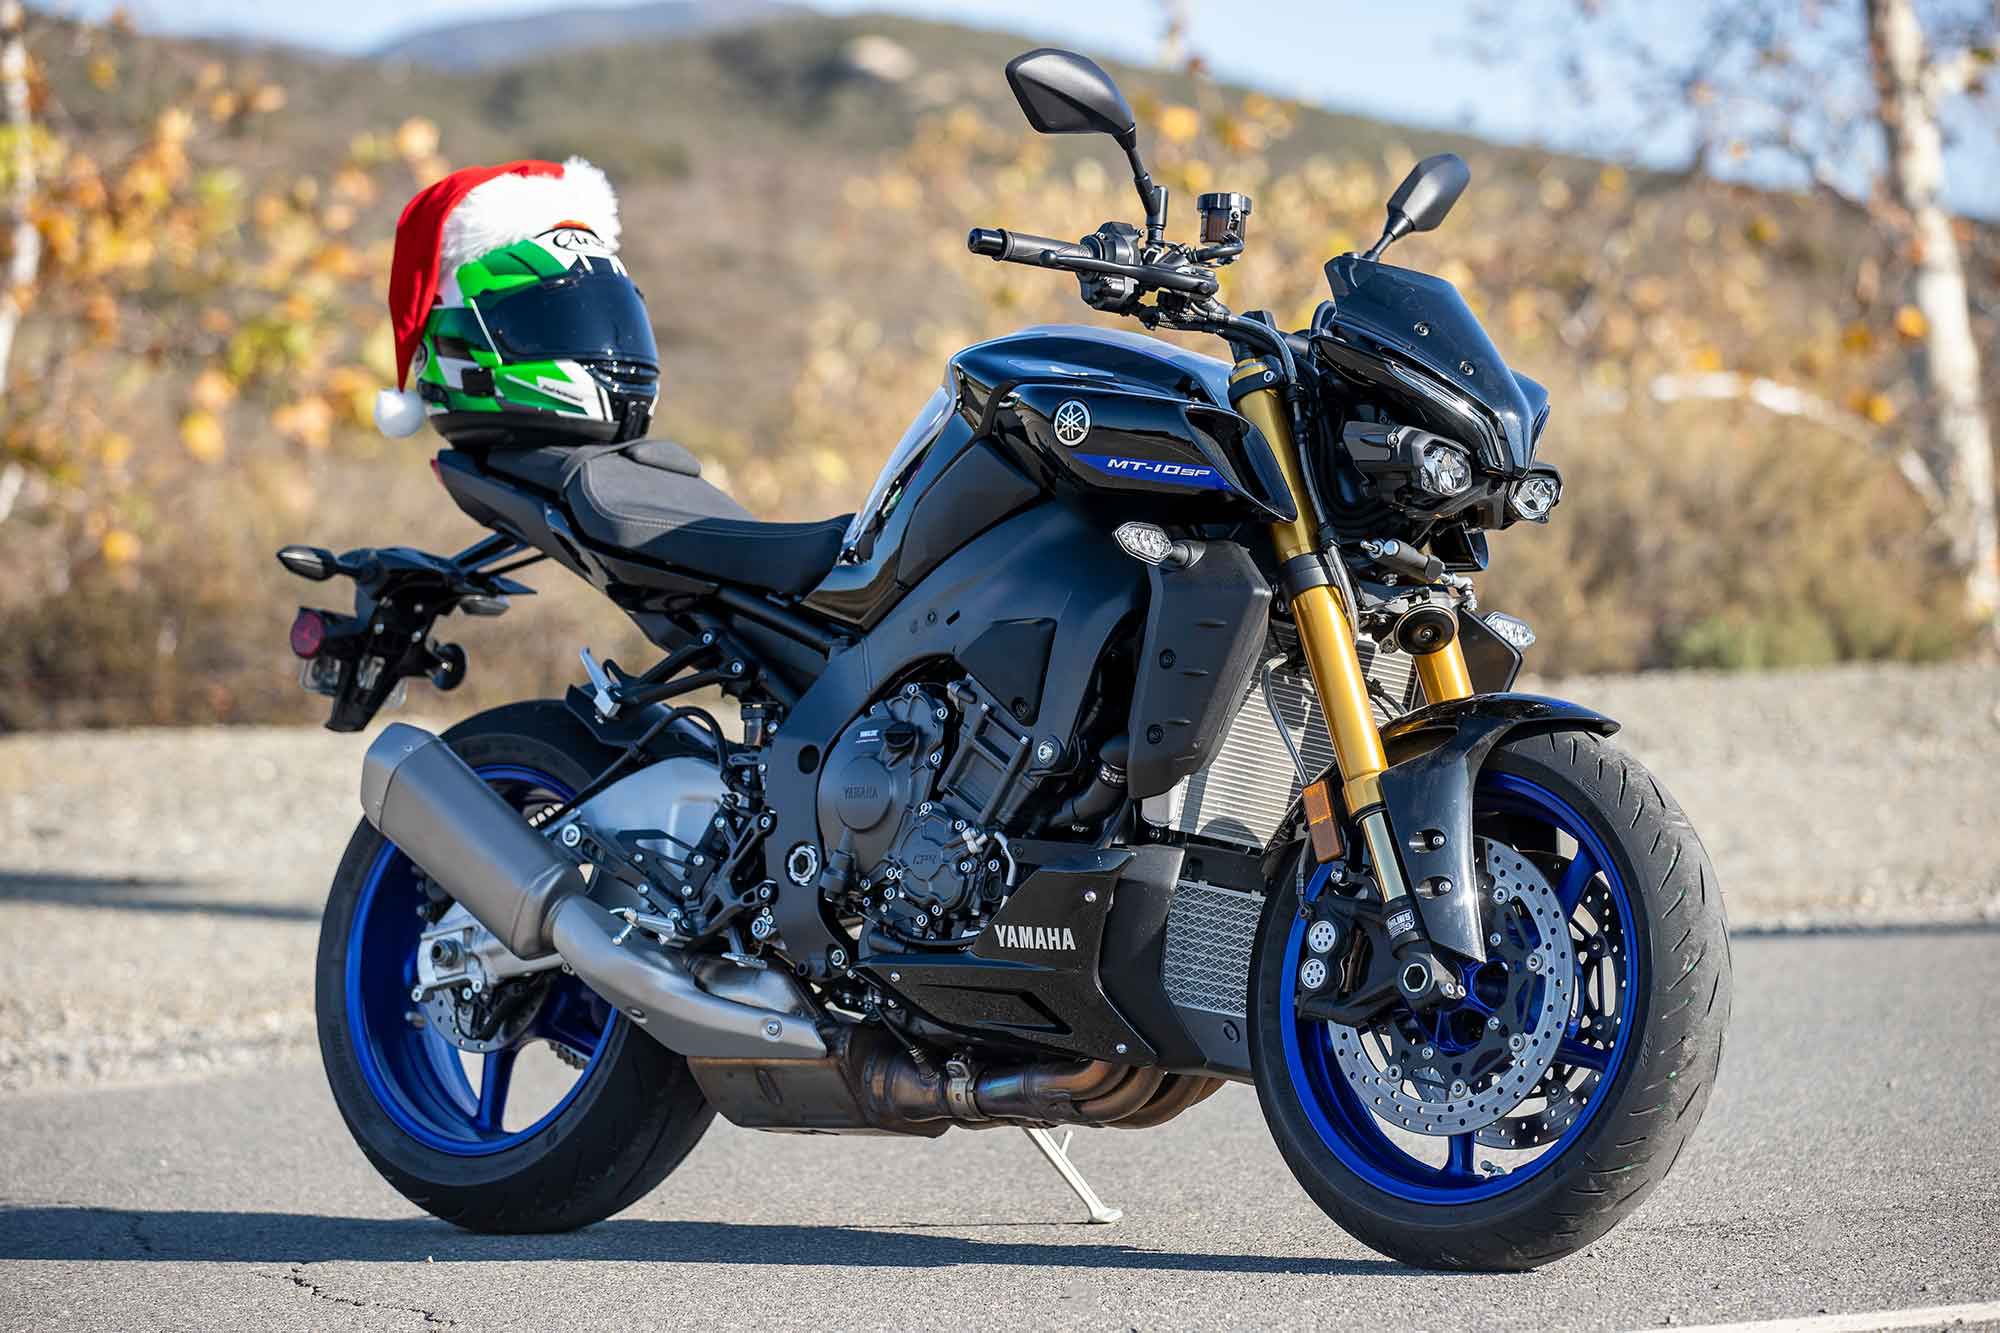 Santa valued Yamaha’s subtle styling improvements, highlighted by the painted chin fairing and polished alloy swingarm.